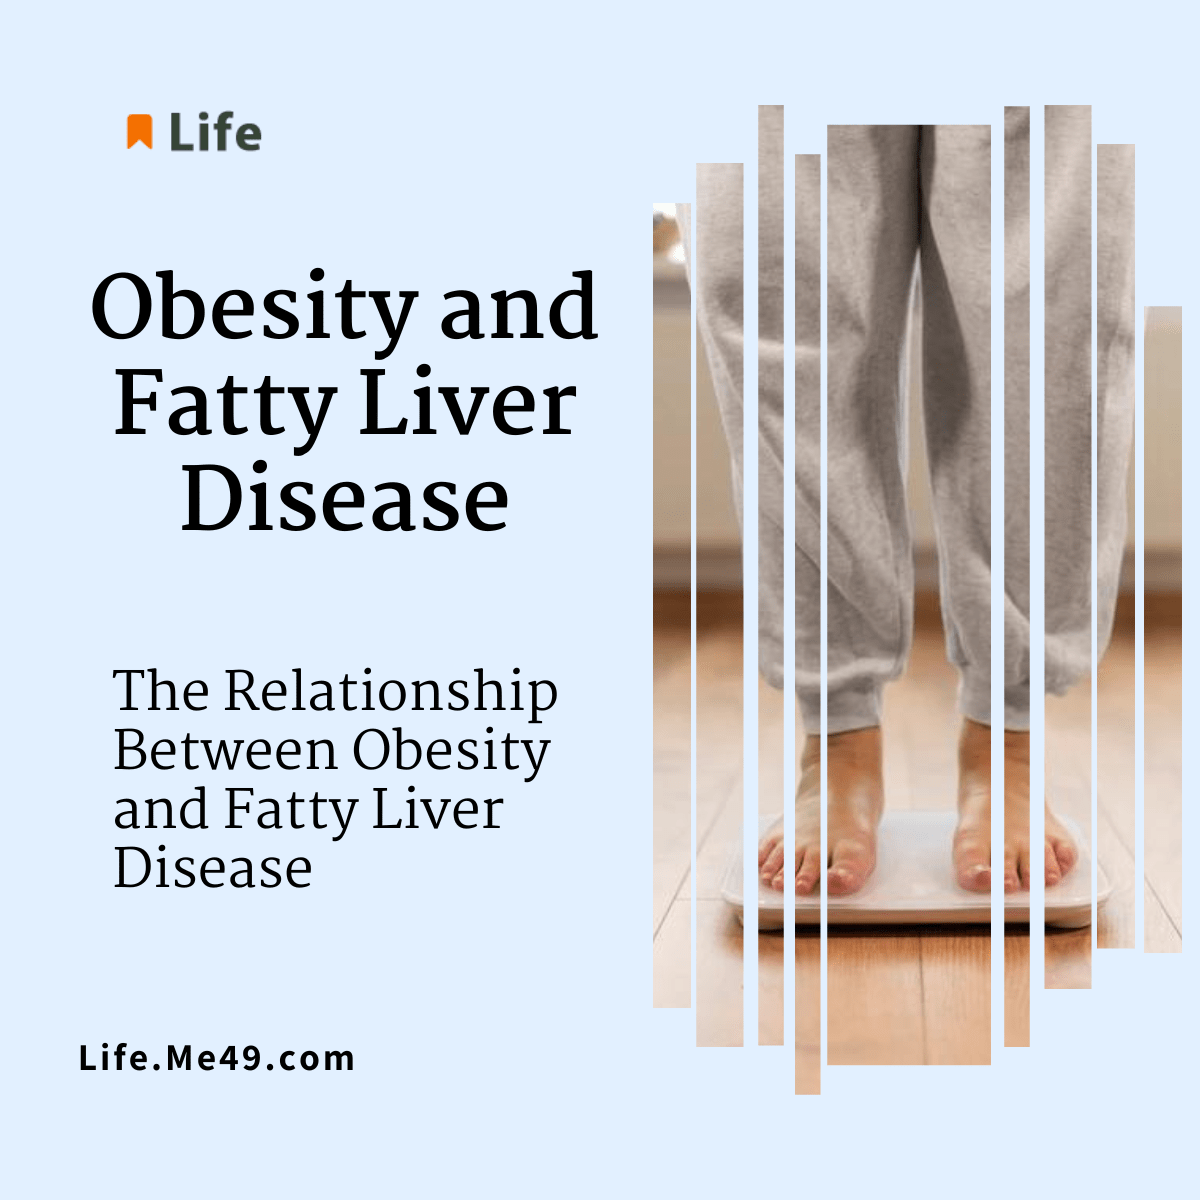 Obesity and Fatty Liver Disease